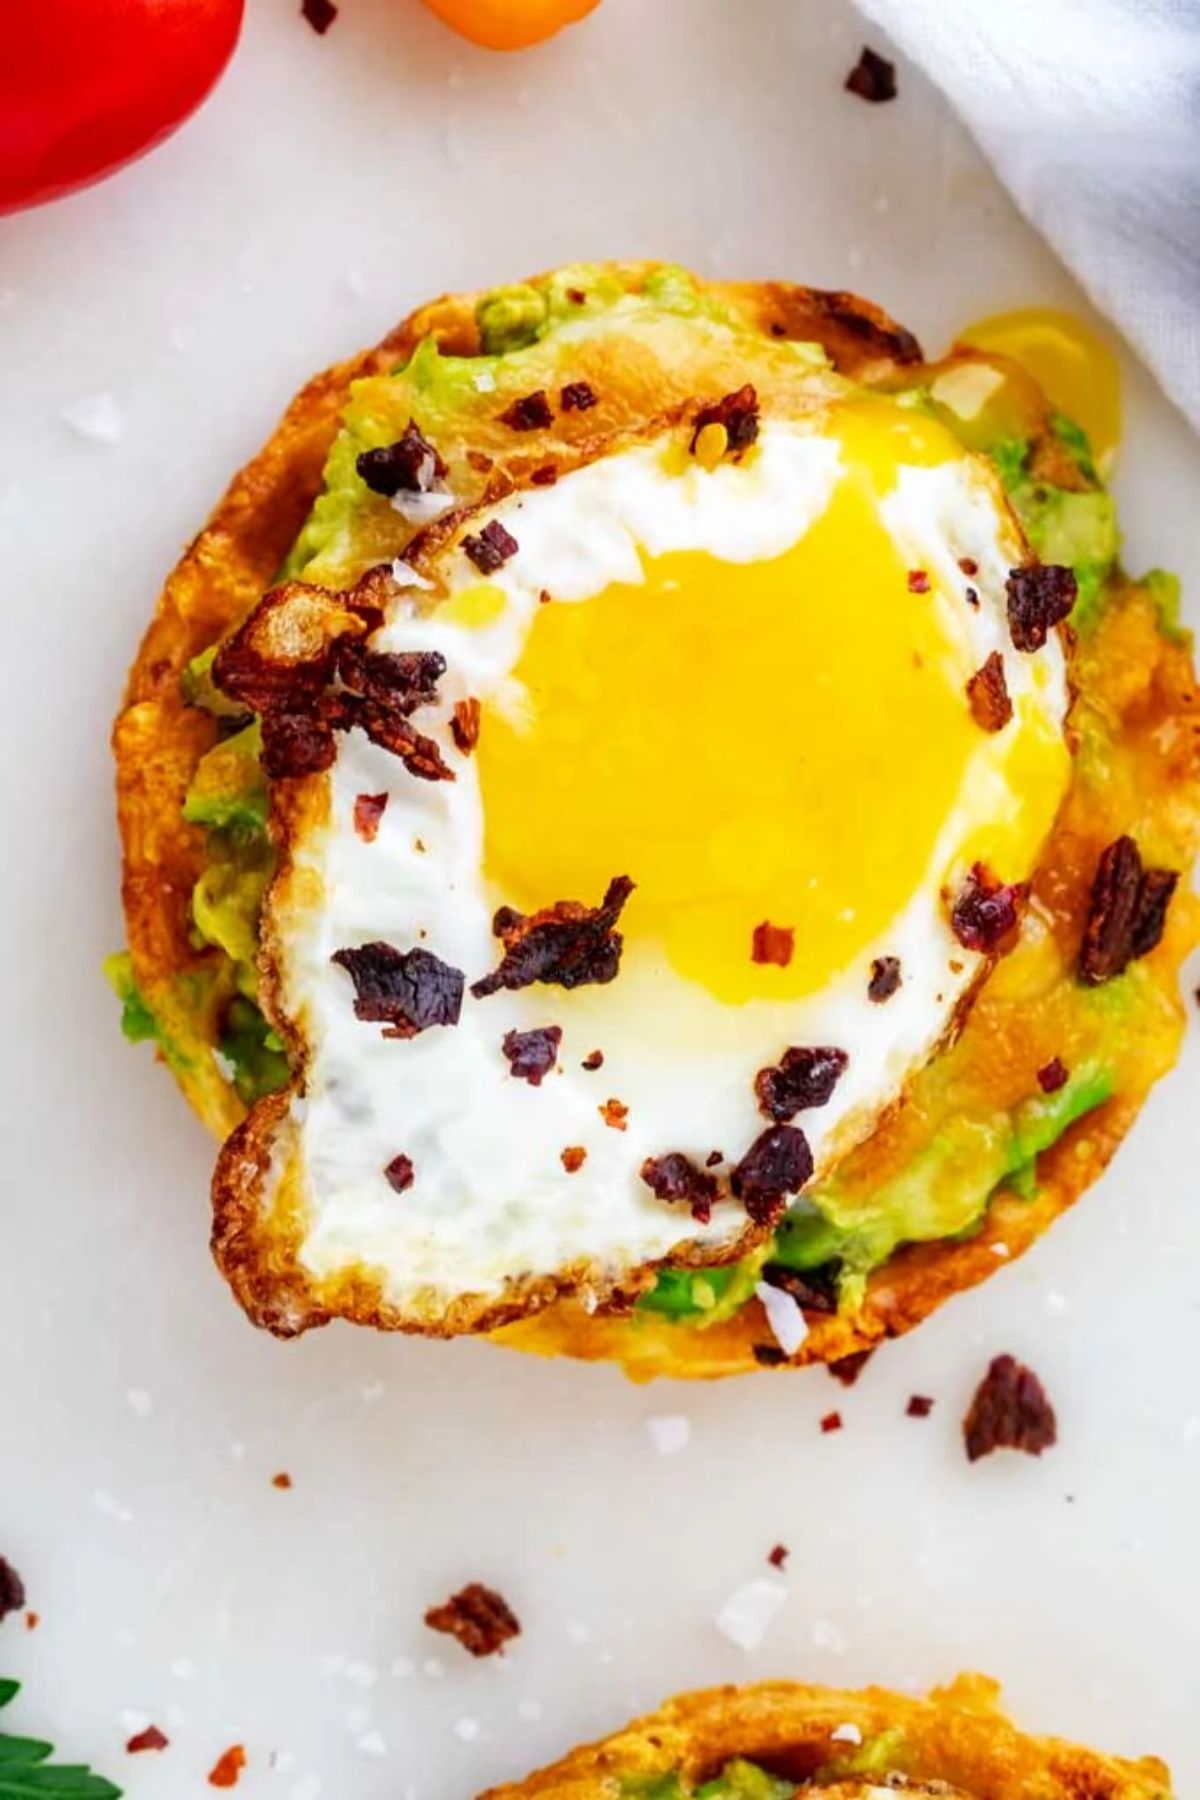 On a white background is a circular piece of avocado taost with a fried egg on top